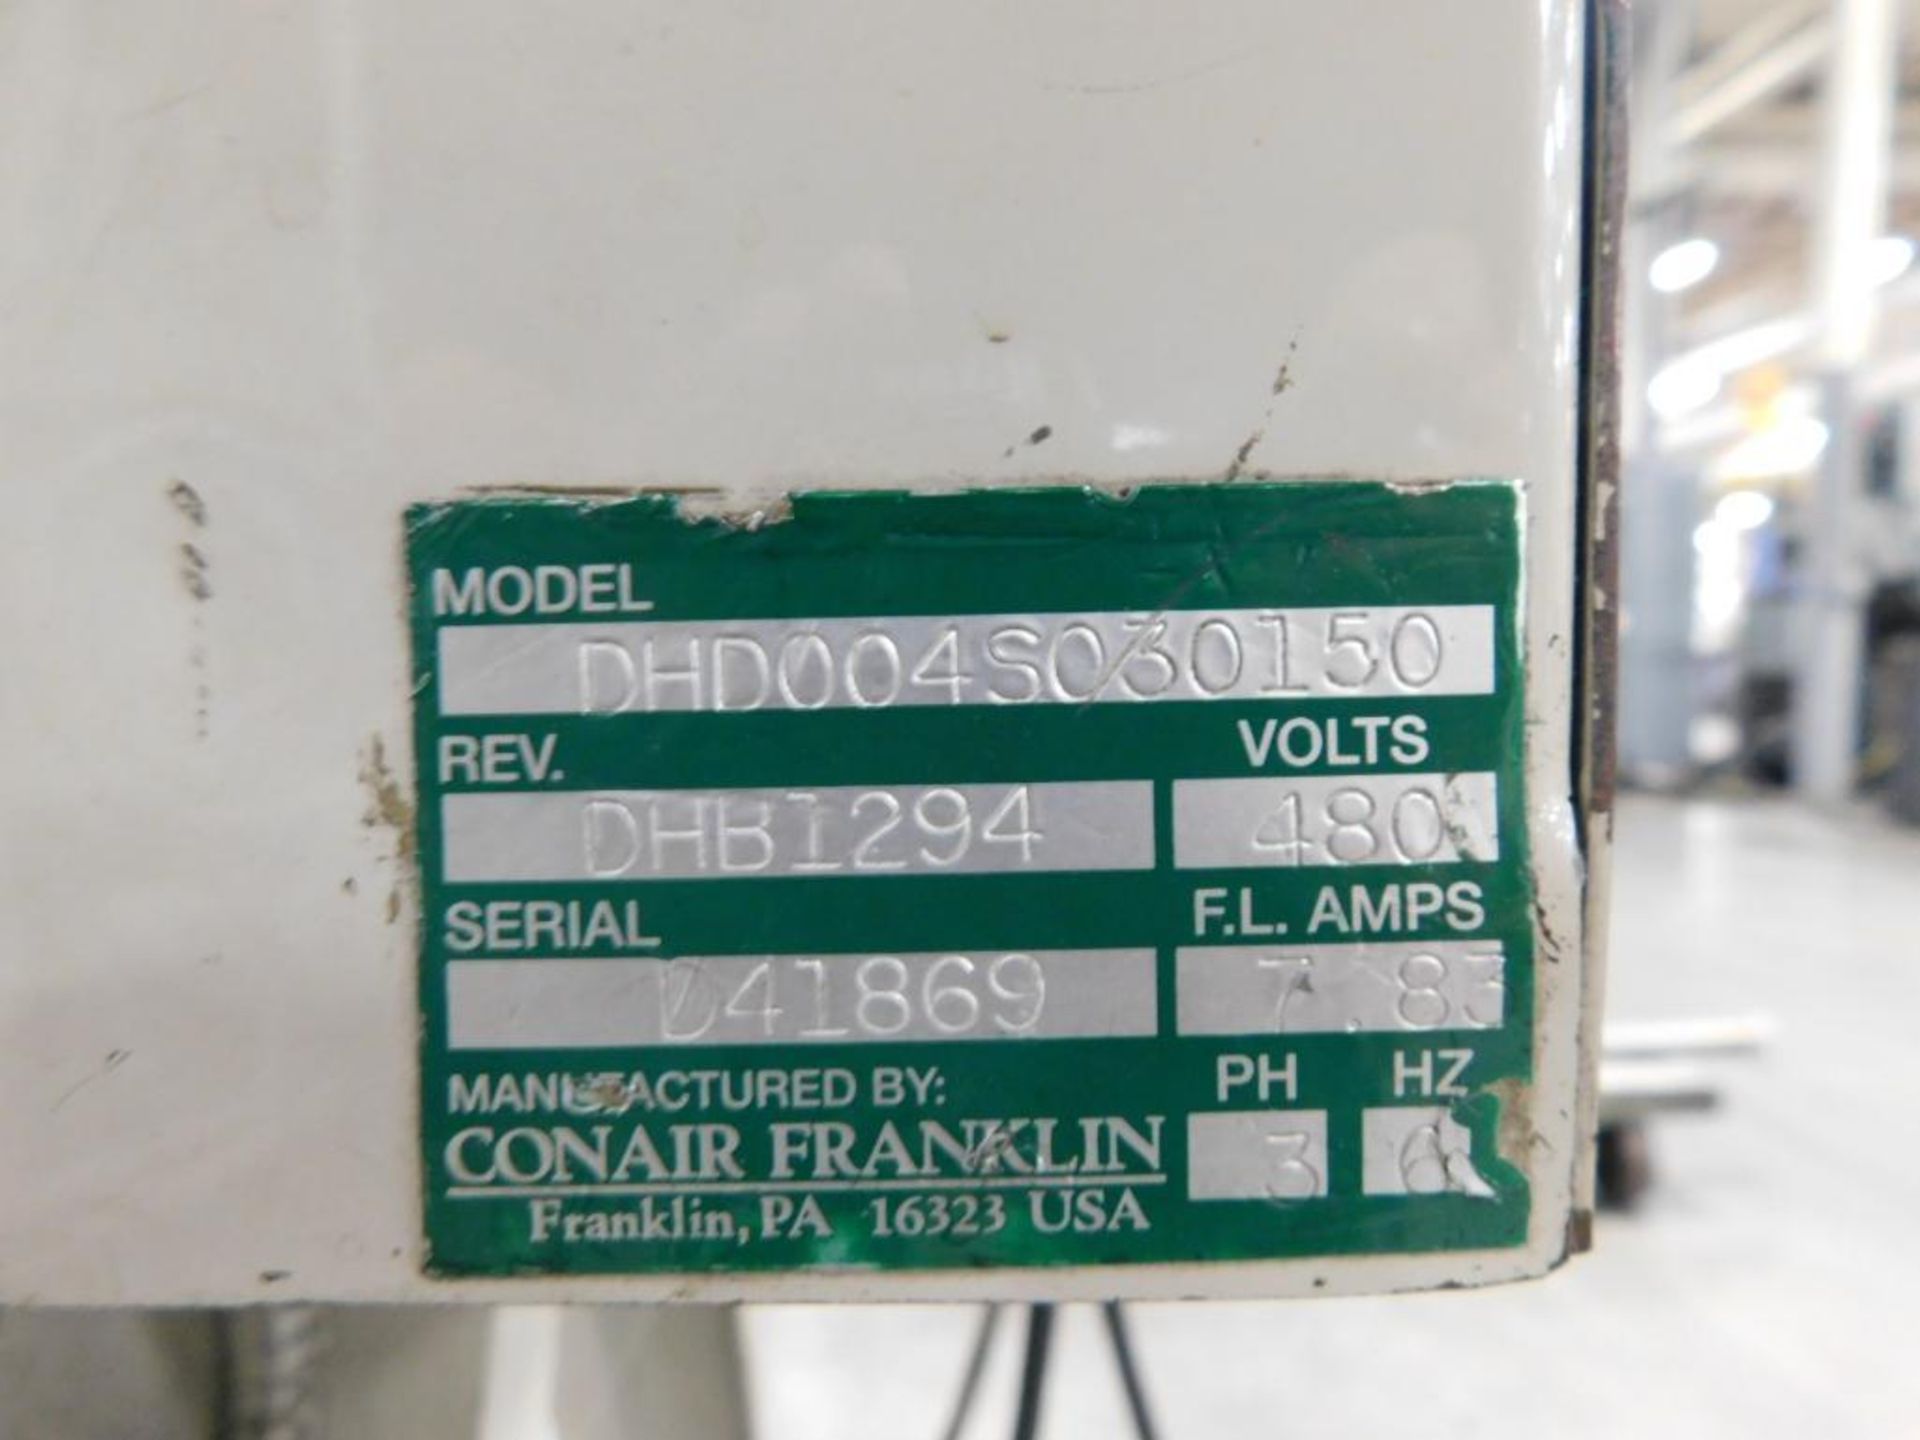 Conair Franklin Desiccant Material Dryer Unit, Approx. 100 Lb. Capacity Top Side Vacuum Loaded Gravi - Image 7 of 7